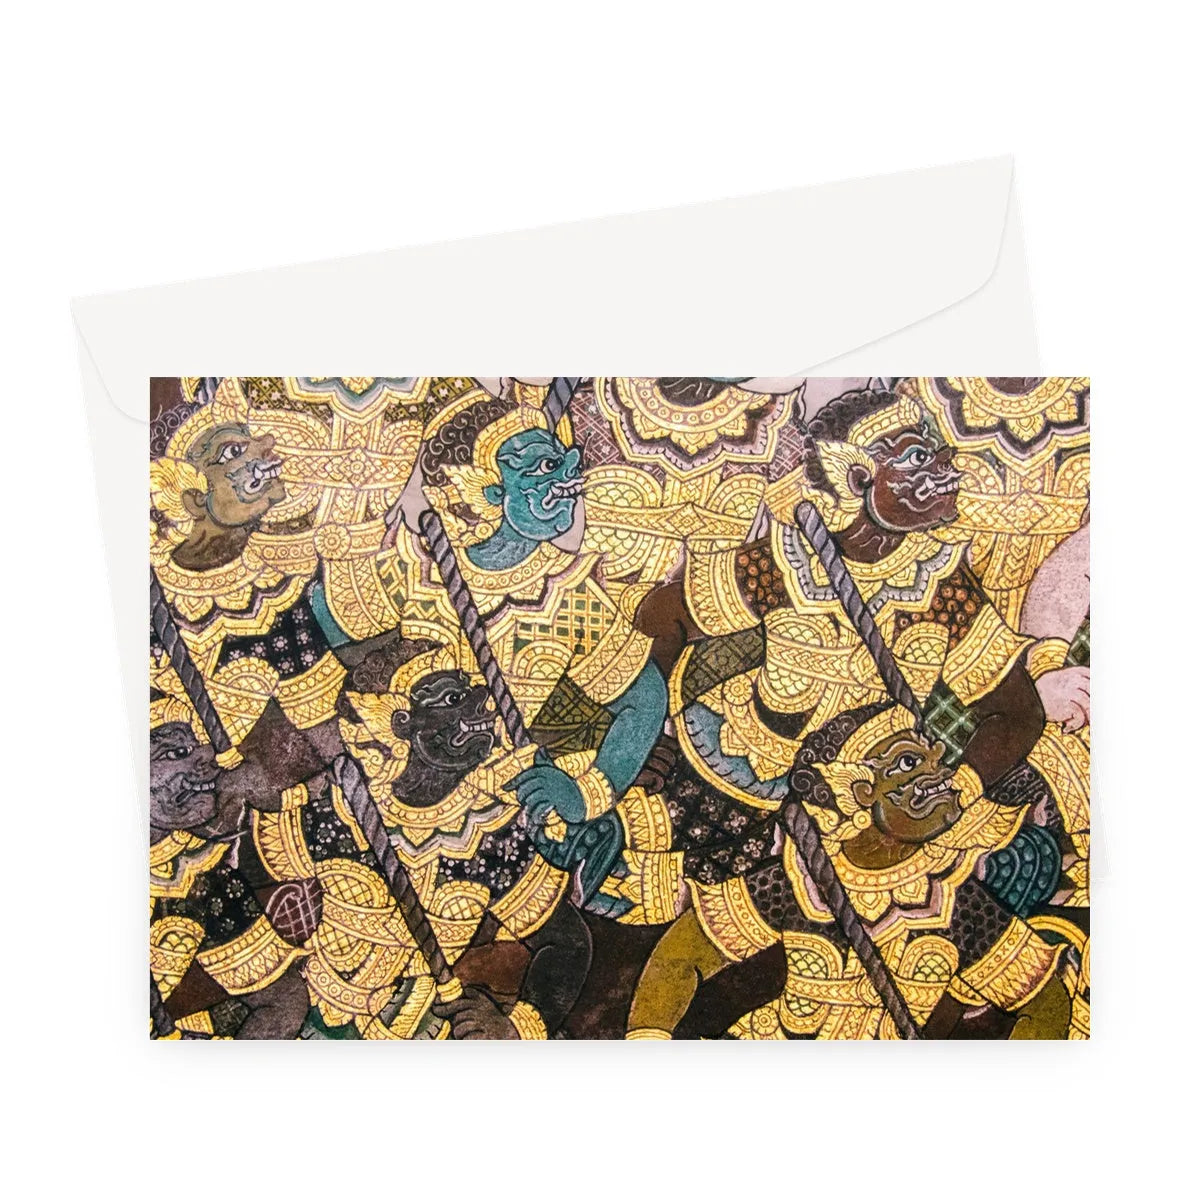 Action Men - Ancient Thai Temple Art Greeting Card - A5 Landscape / 1 Card - Greeting & Note Cards - Aesthetic Art